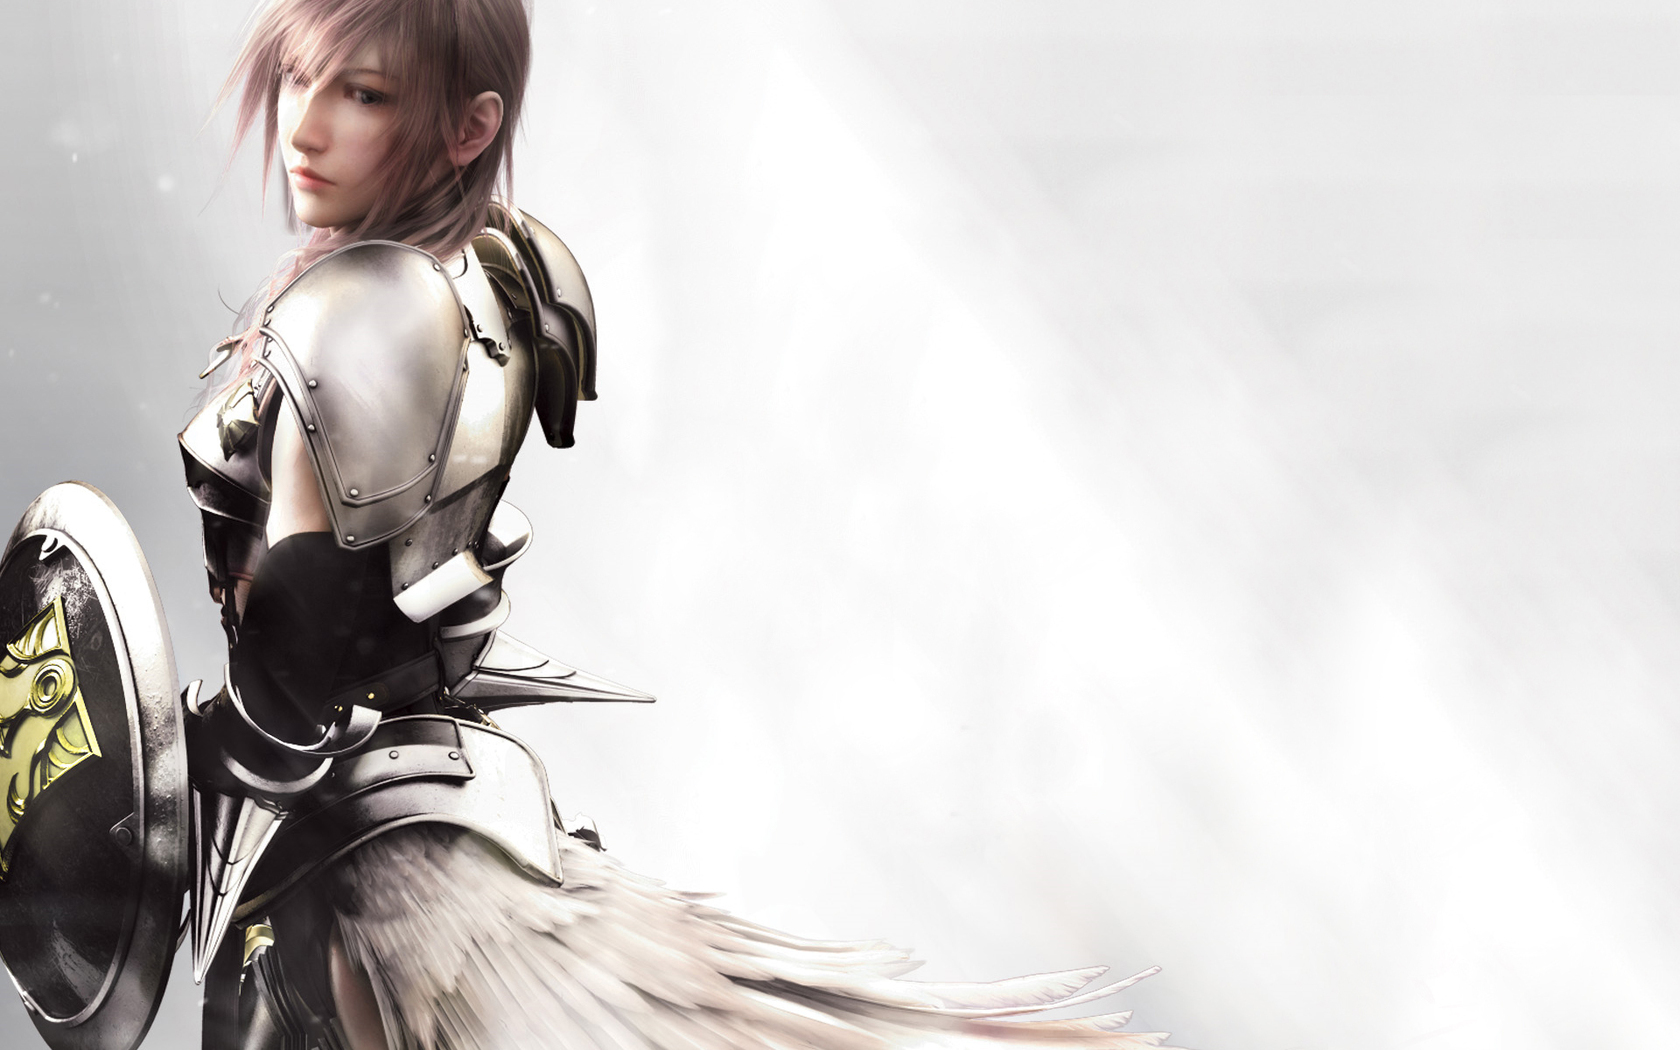 free download final fantasy xiii 2 limited collector